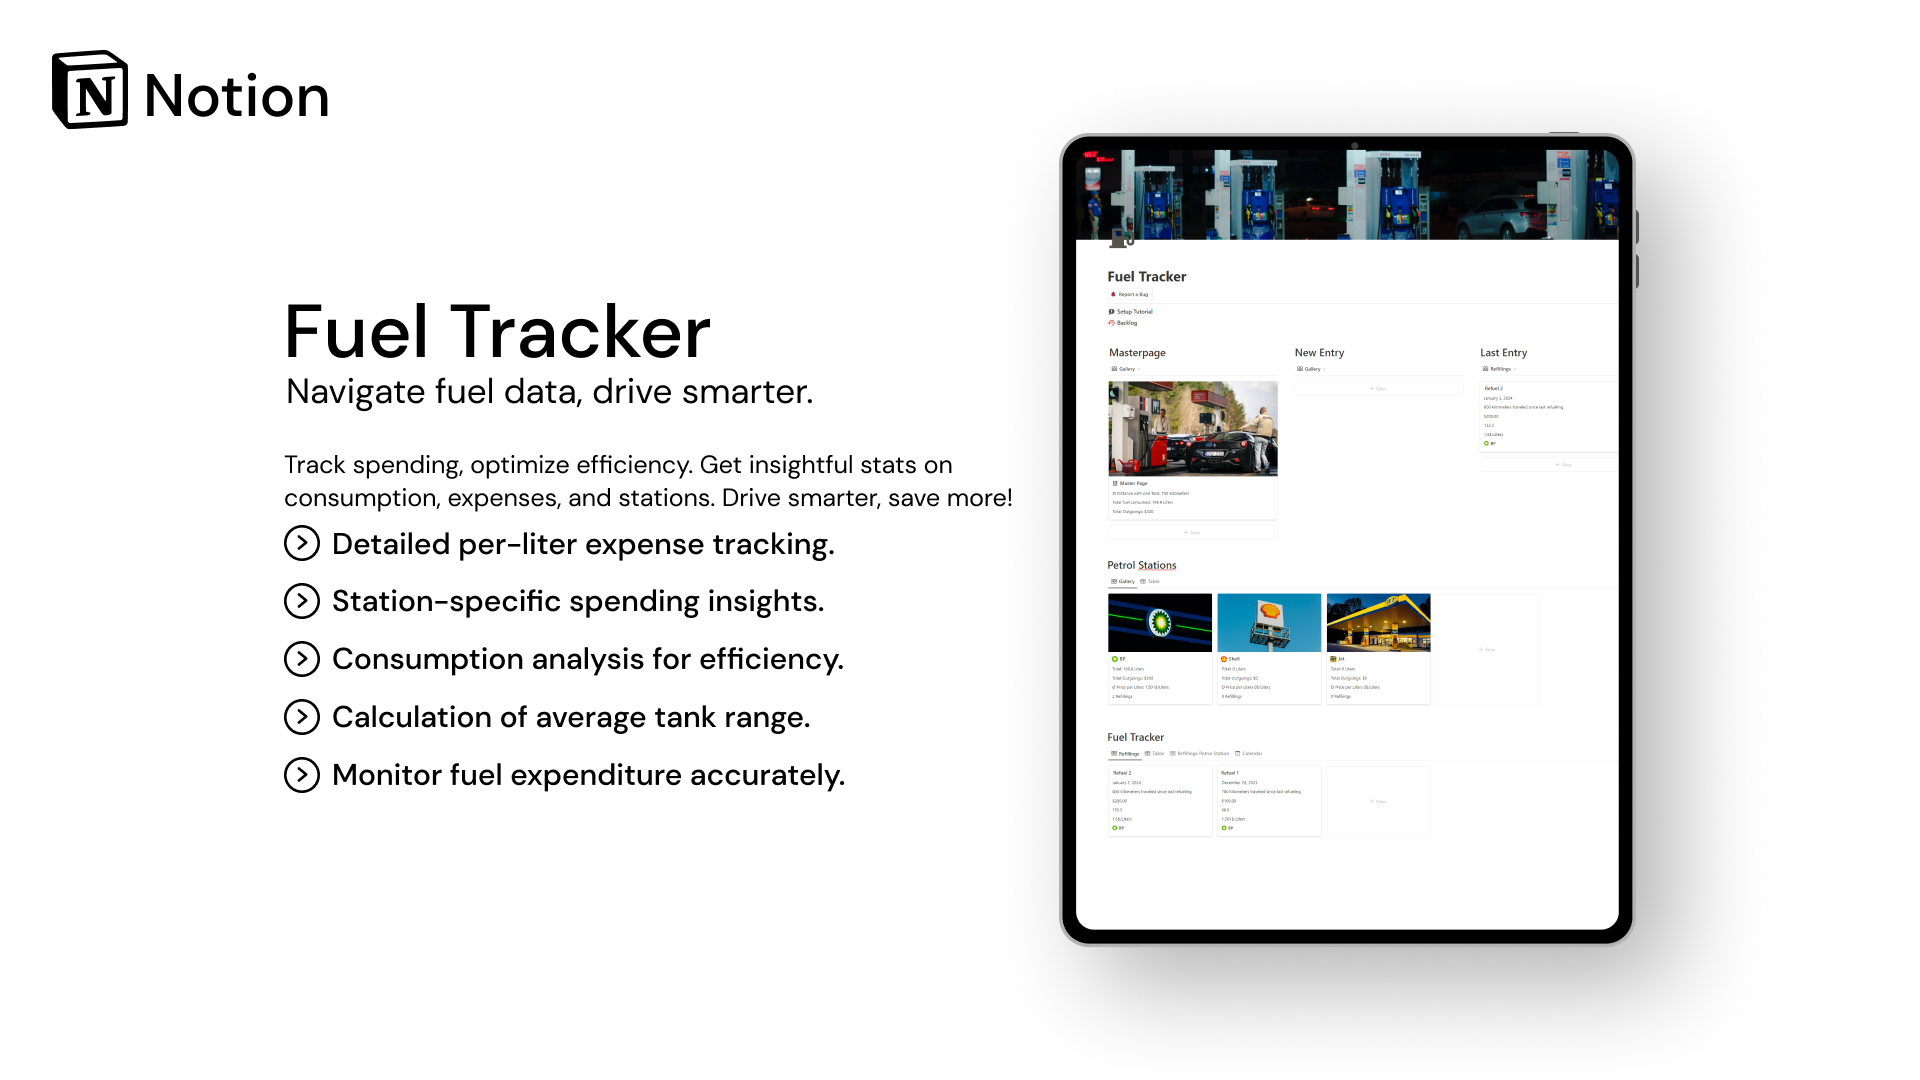 Revolutionize the way you manage your fuel expenses and optimize your driving experience with the intuitive fuel tracker.